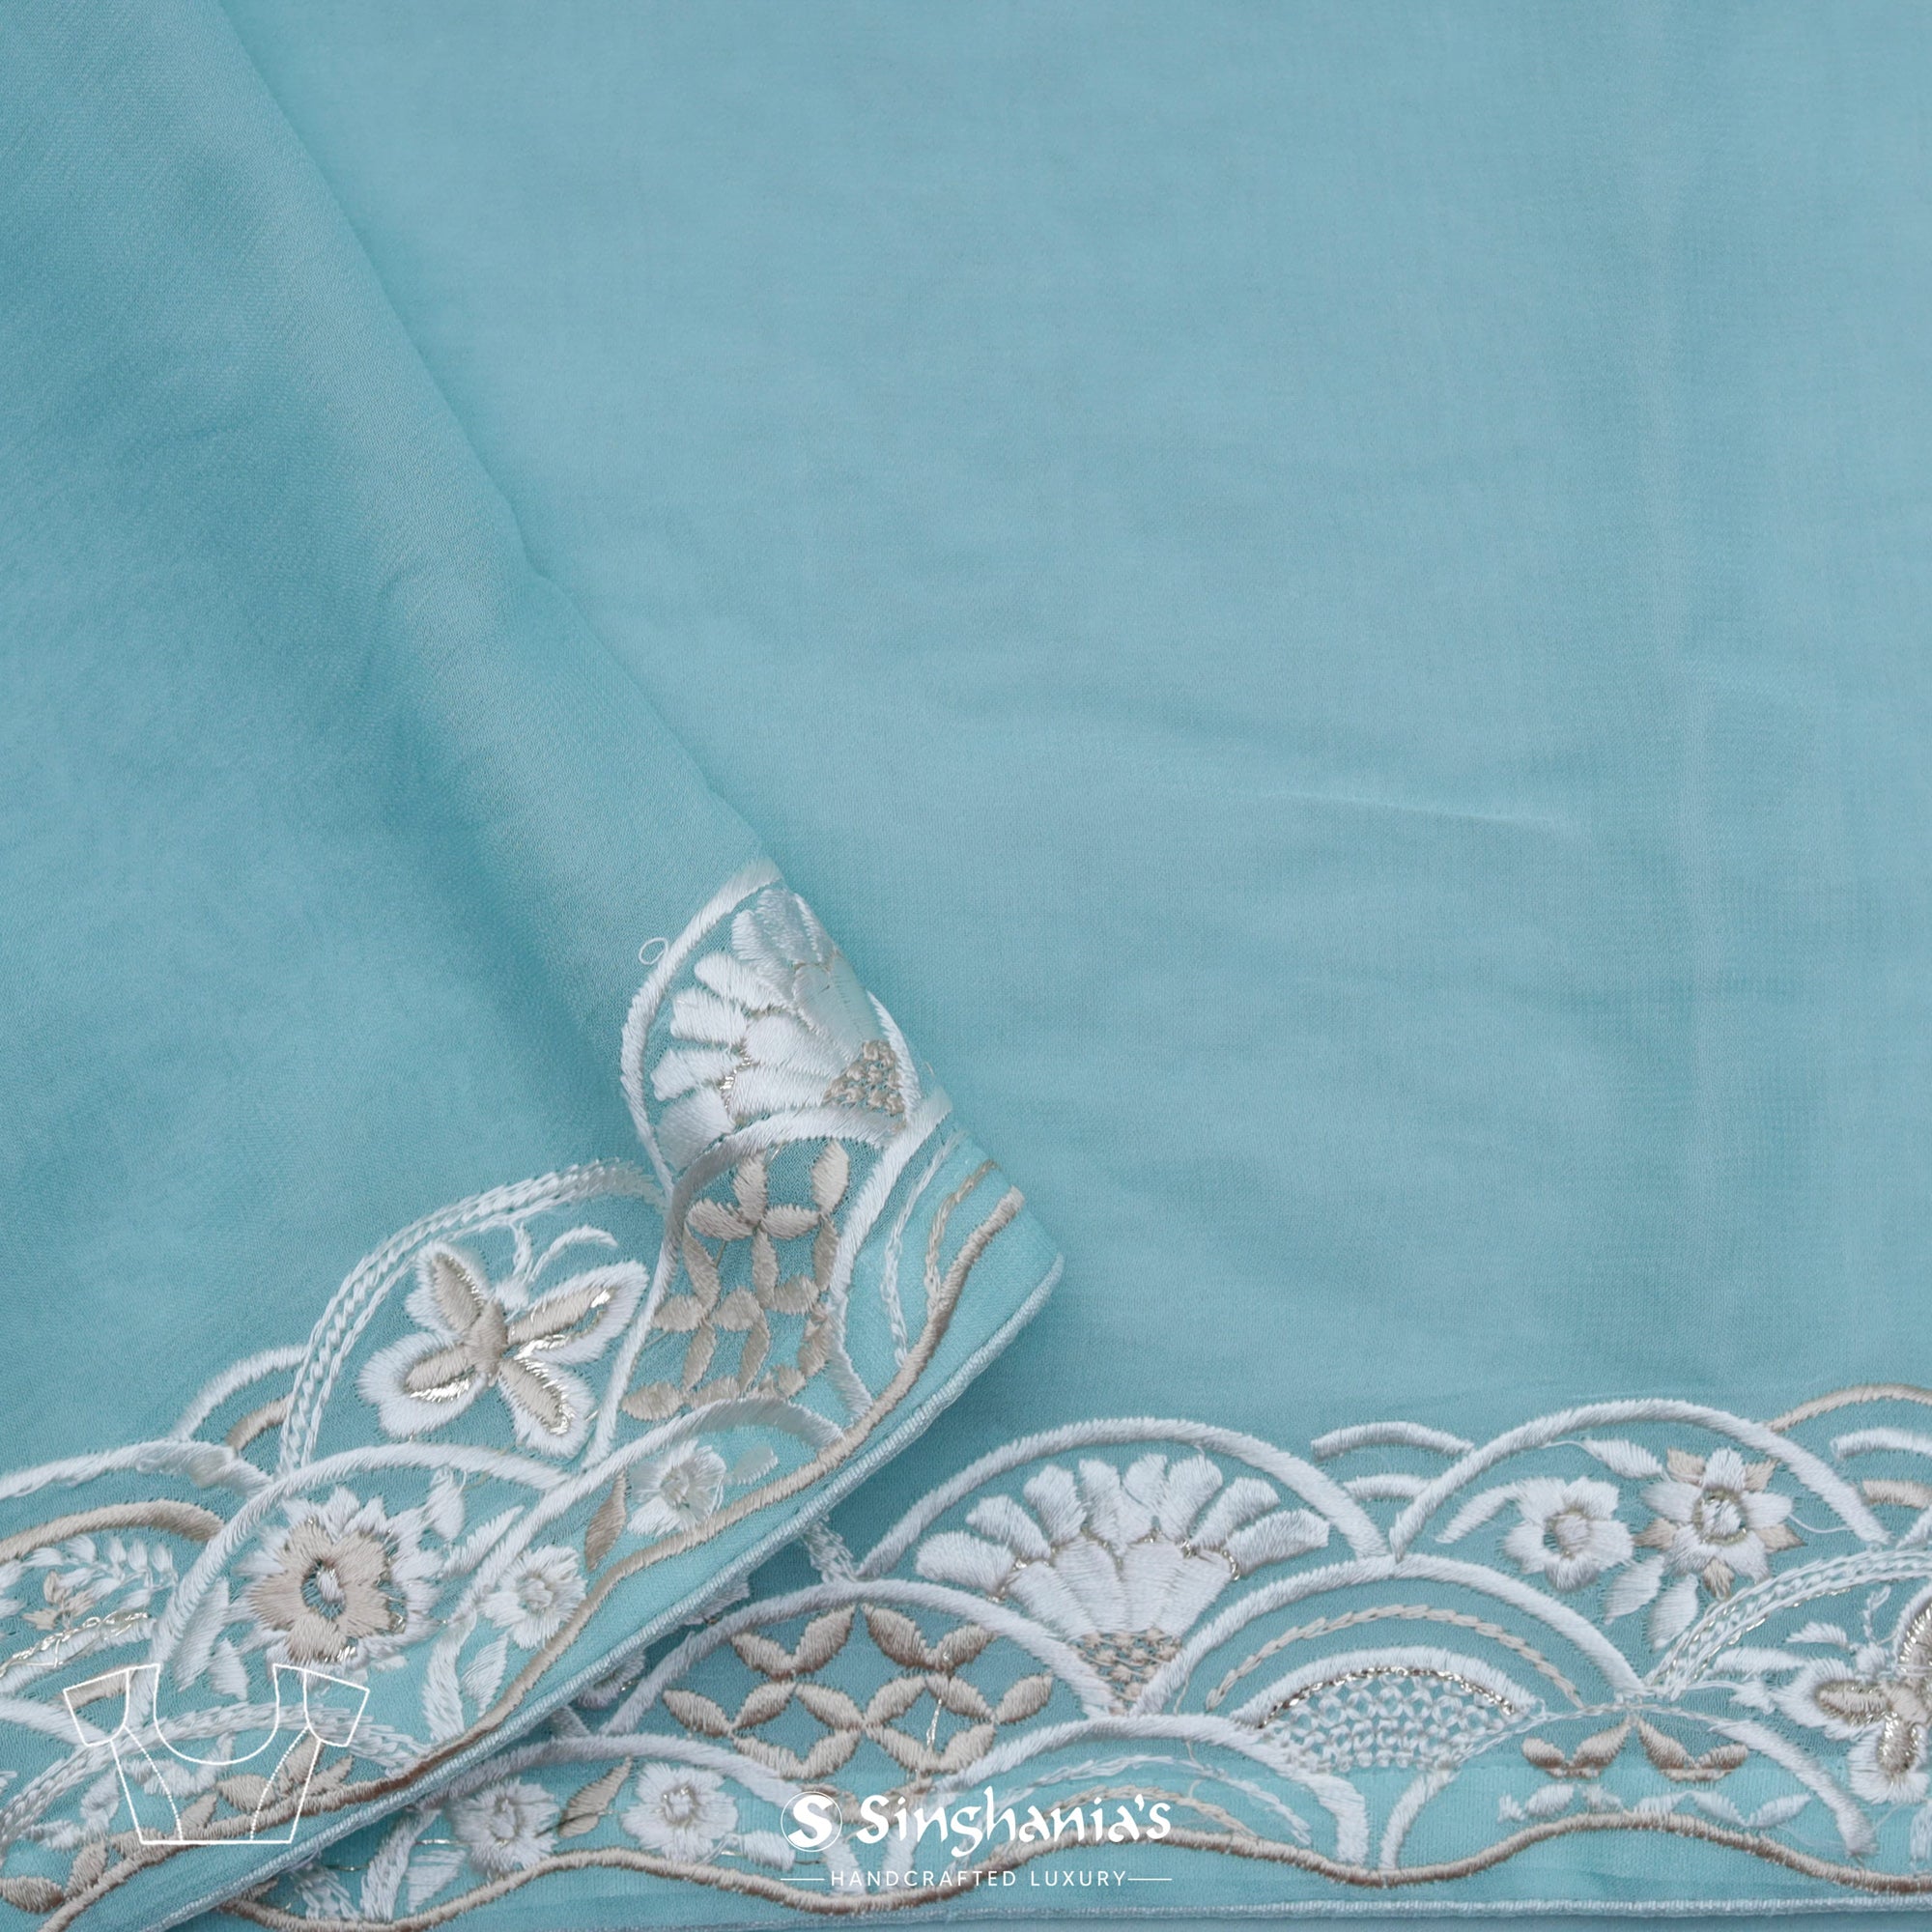 Sky Blue Georgette Saree With Resham Embroidery